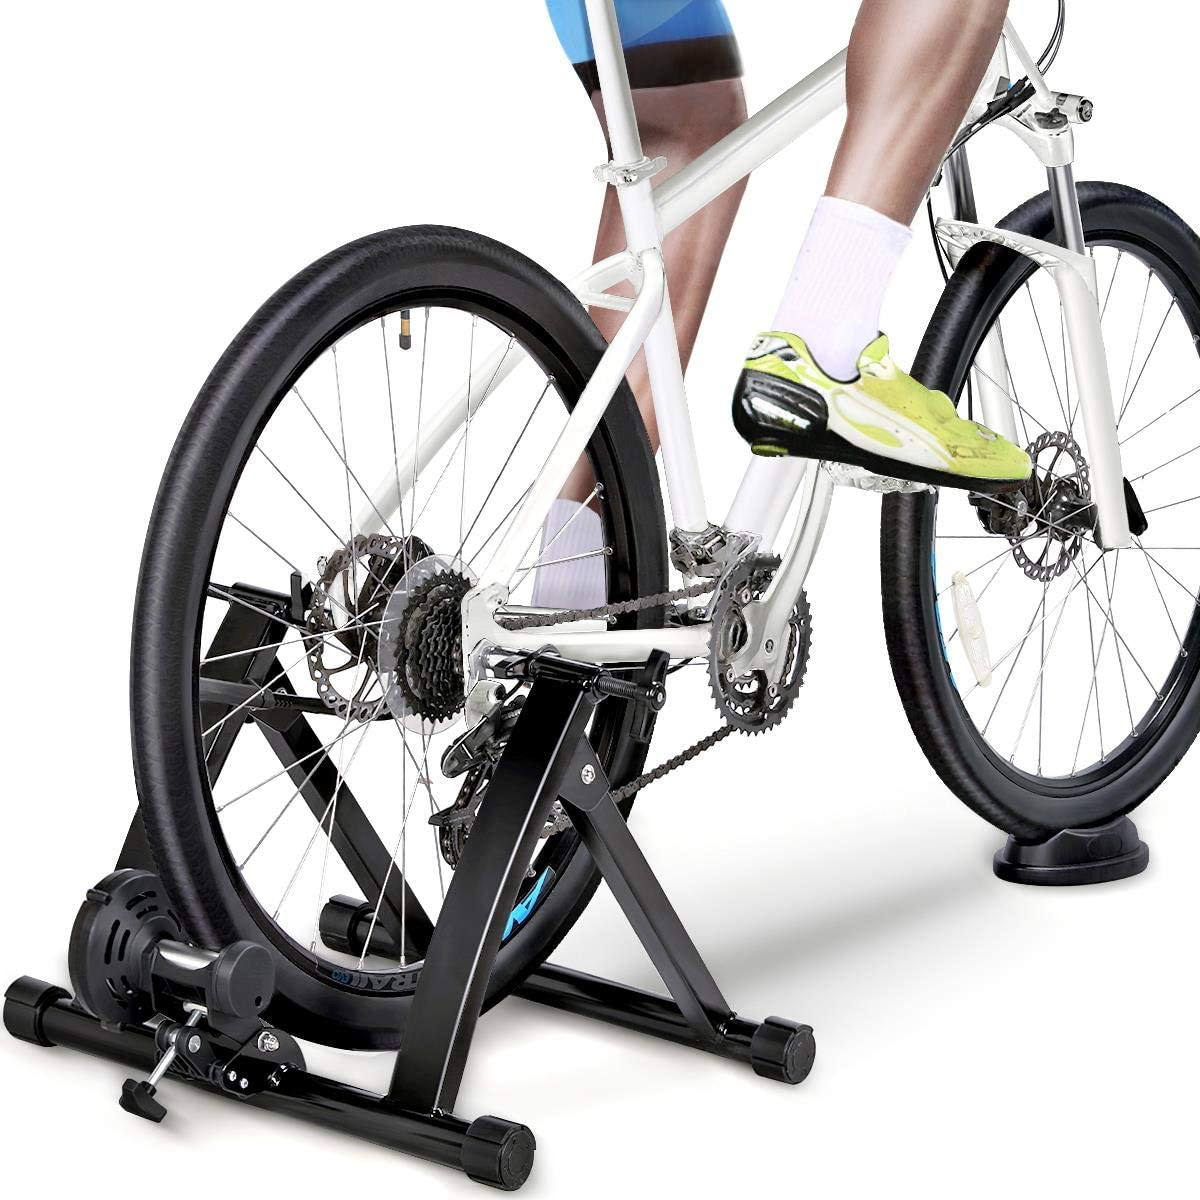 You can rest your mountain bike on a stationary trainer to set your ideal saddle position.